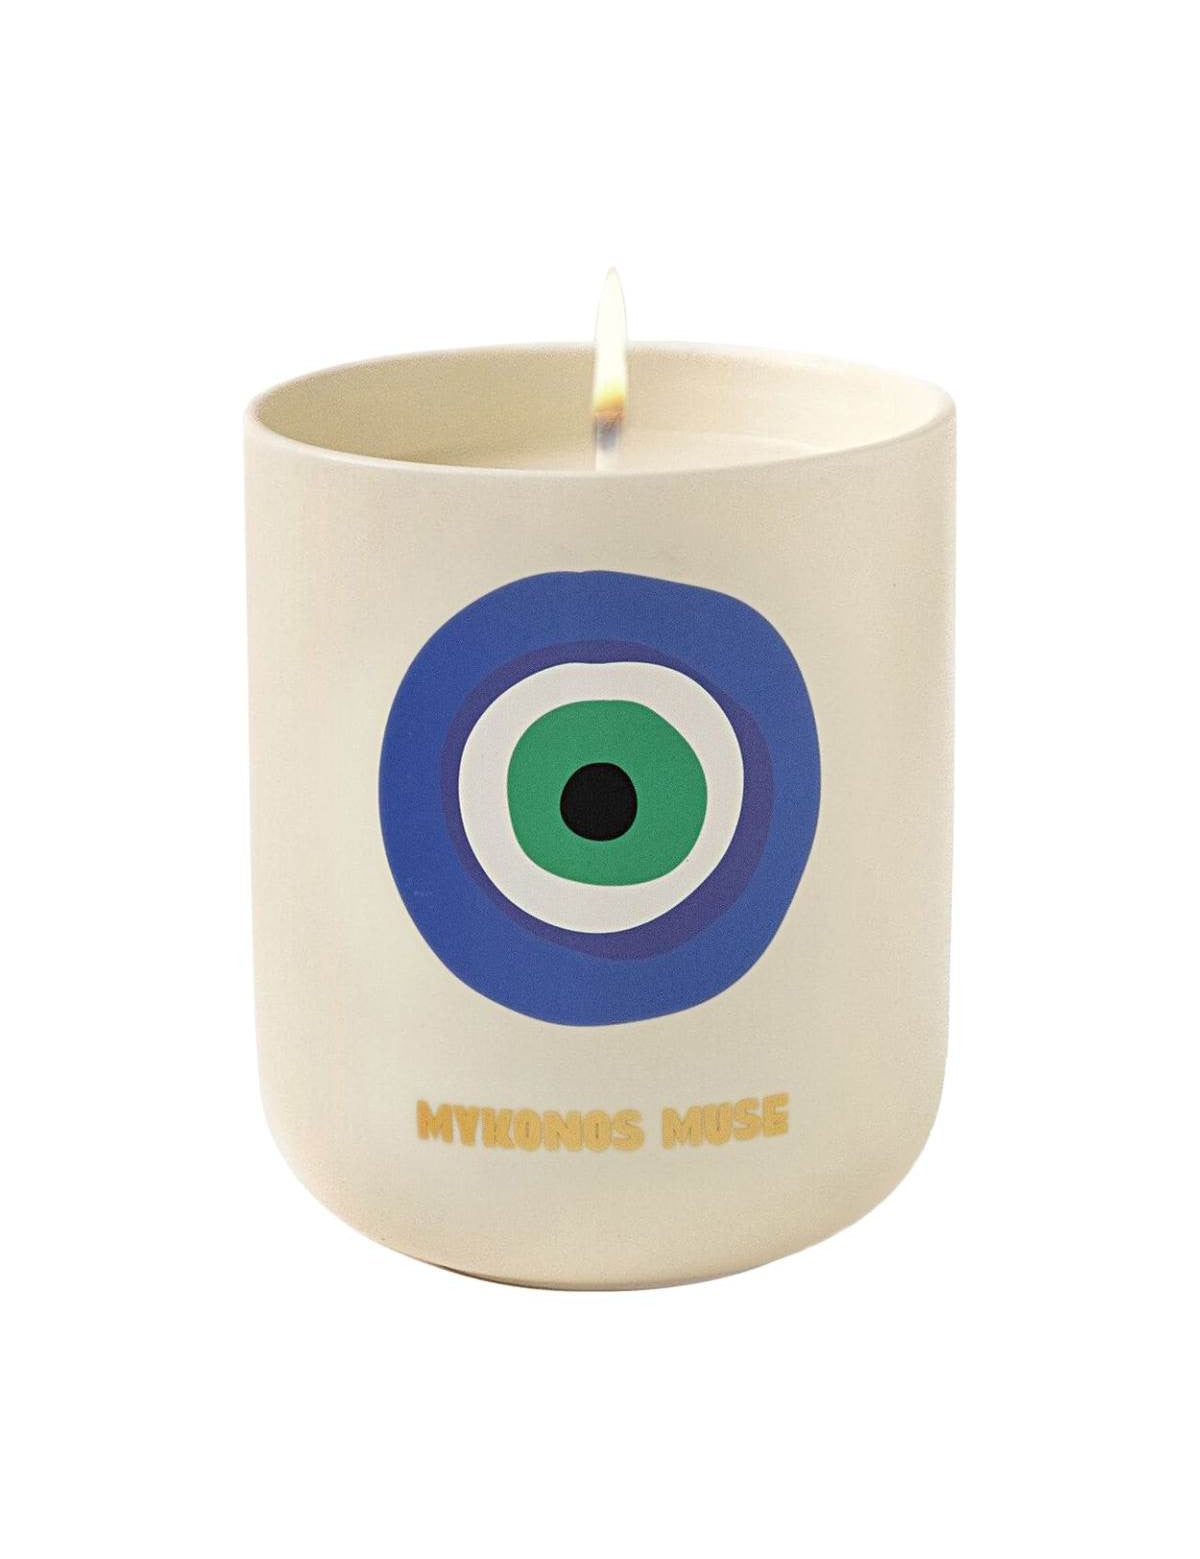 assouline-mykonos-muse-scented-candle.jpg